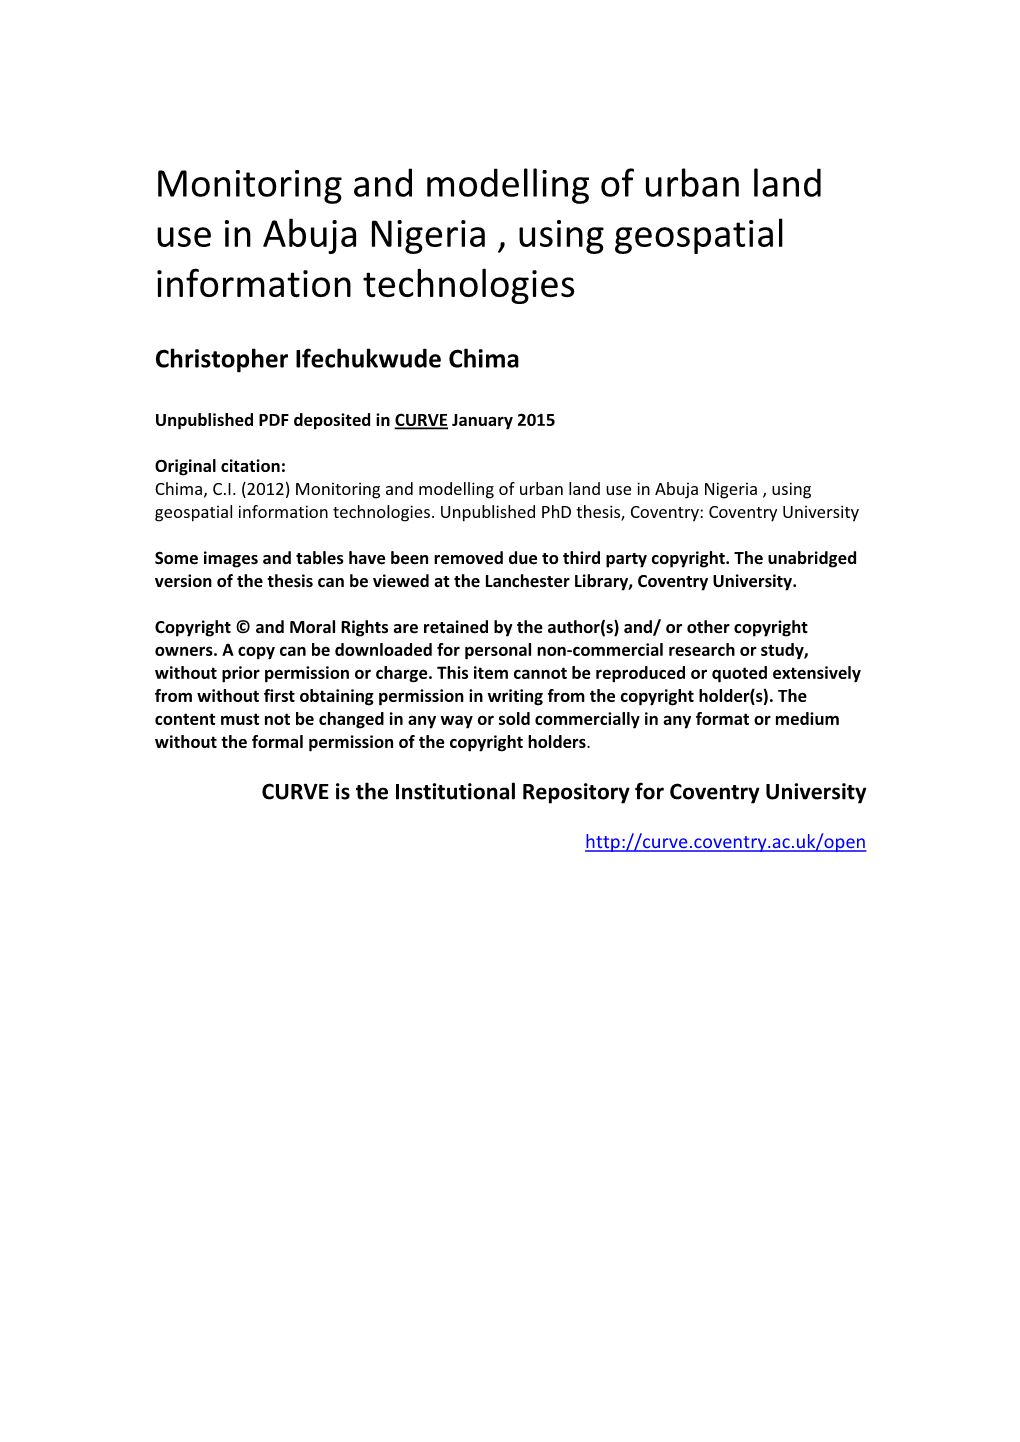 Monitoring and Modelling of Urban Land Use in Abuja Nigeria , Using Geospatial Information Technologies